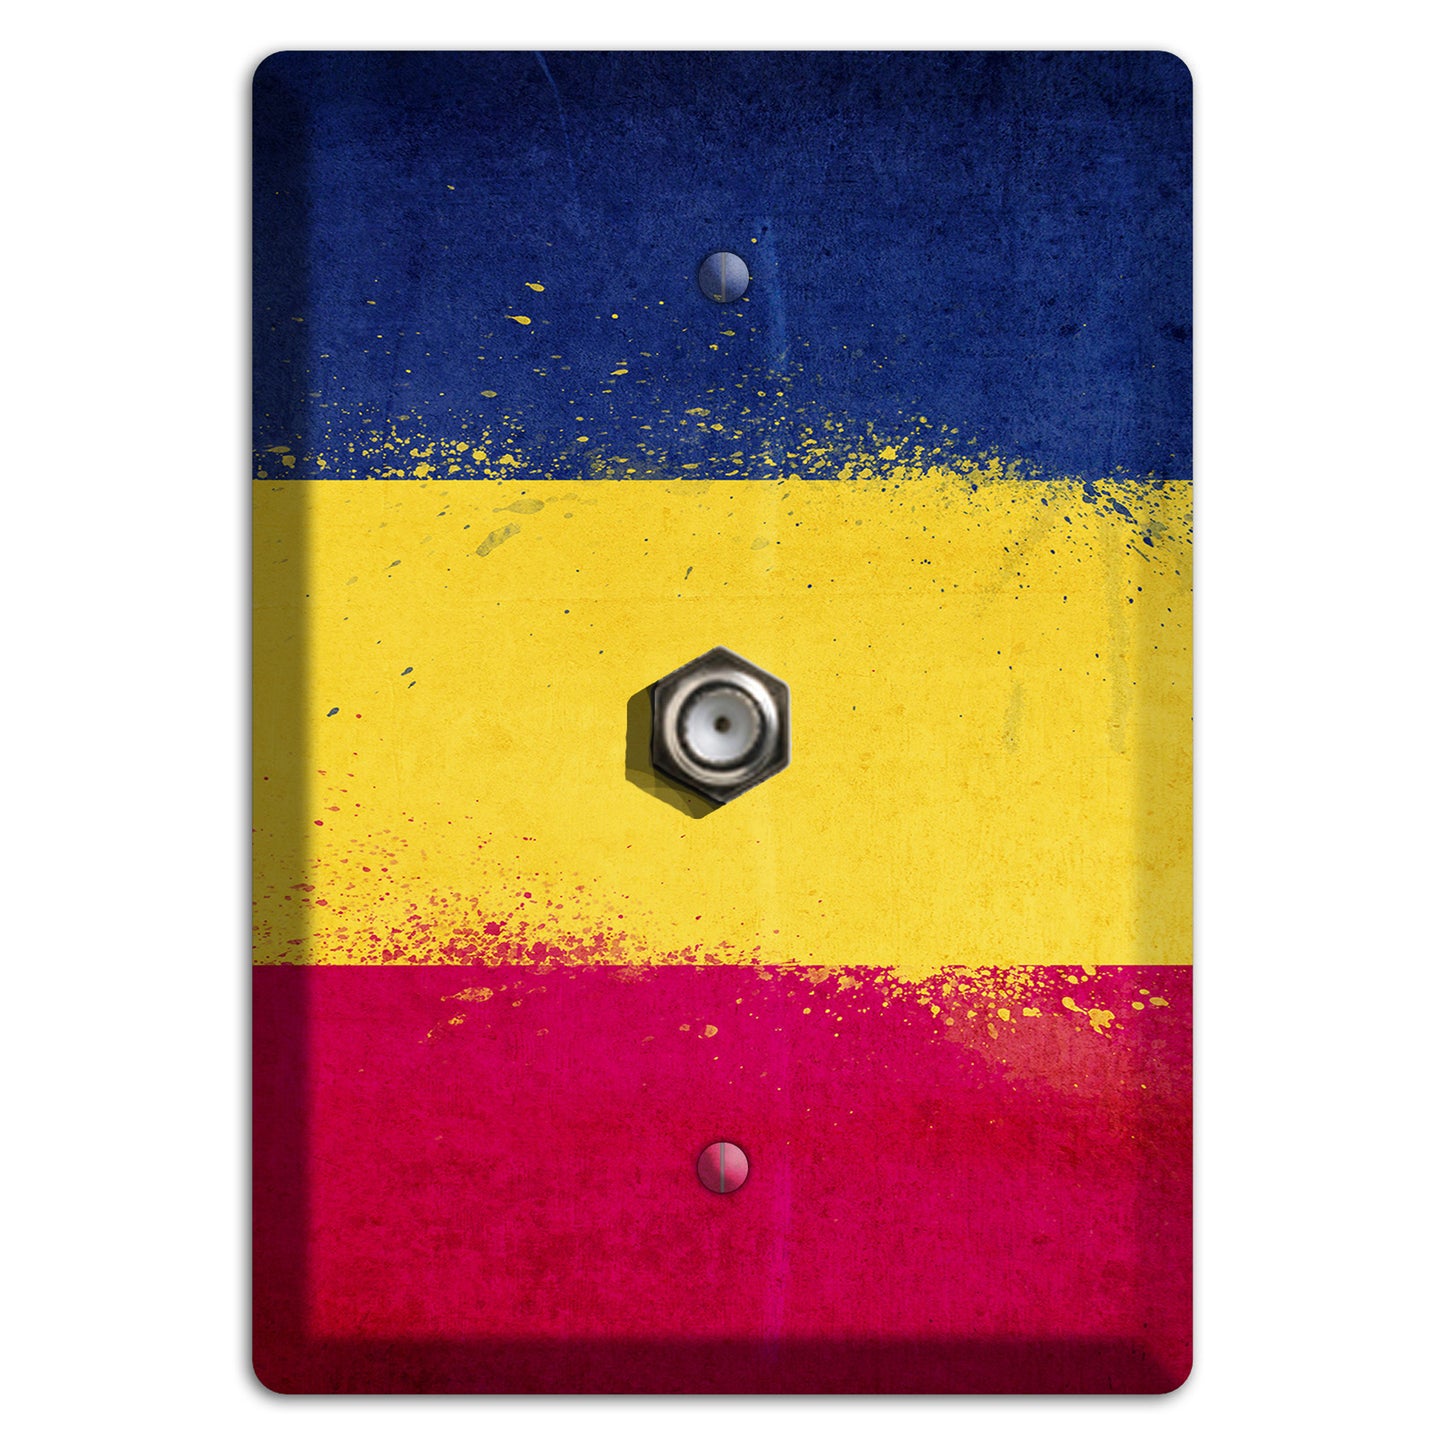 Chad Cover Plates Cable Wallplate